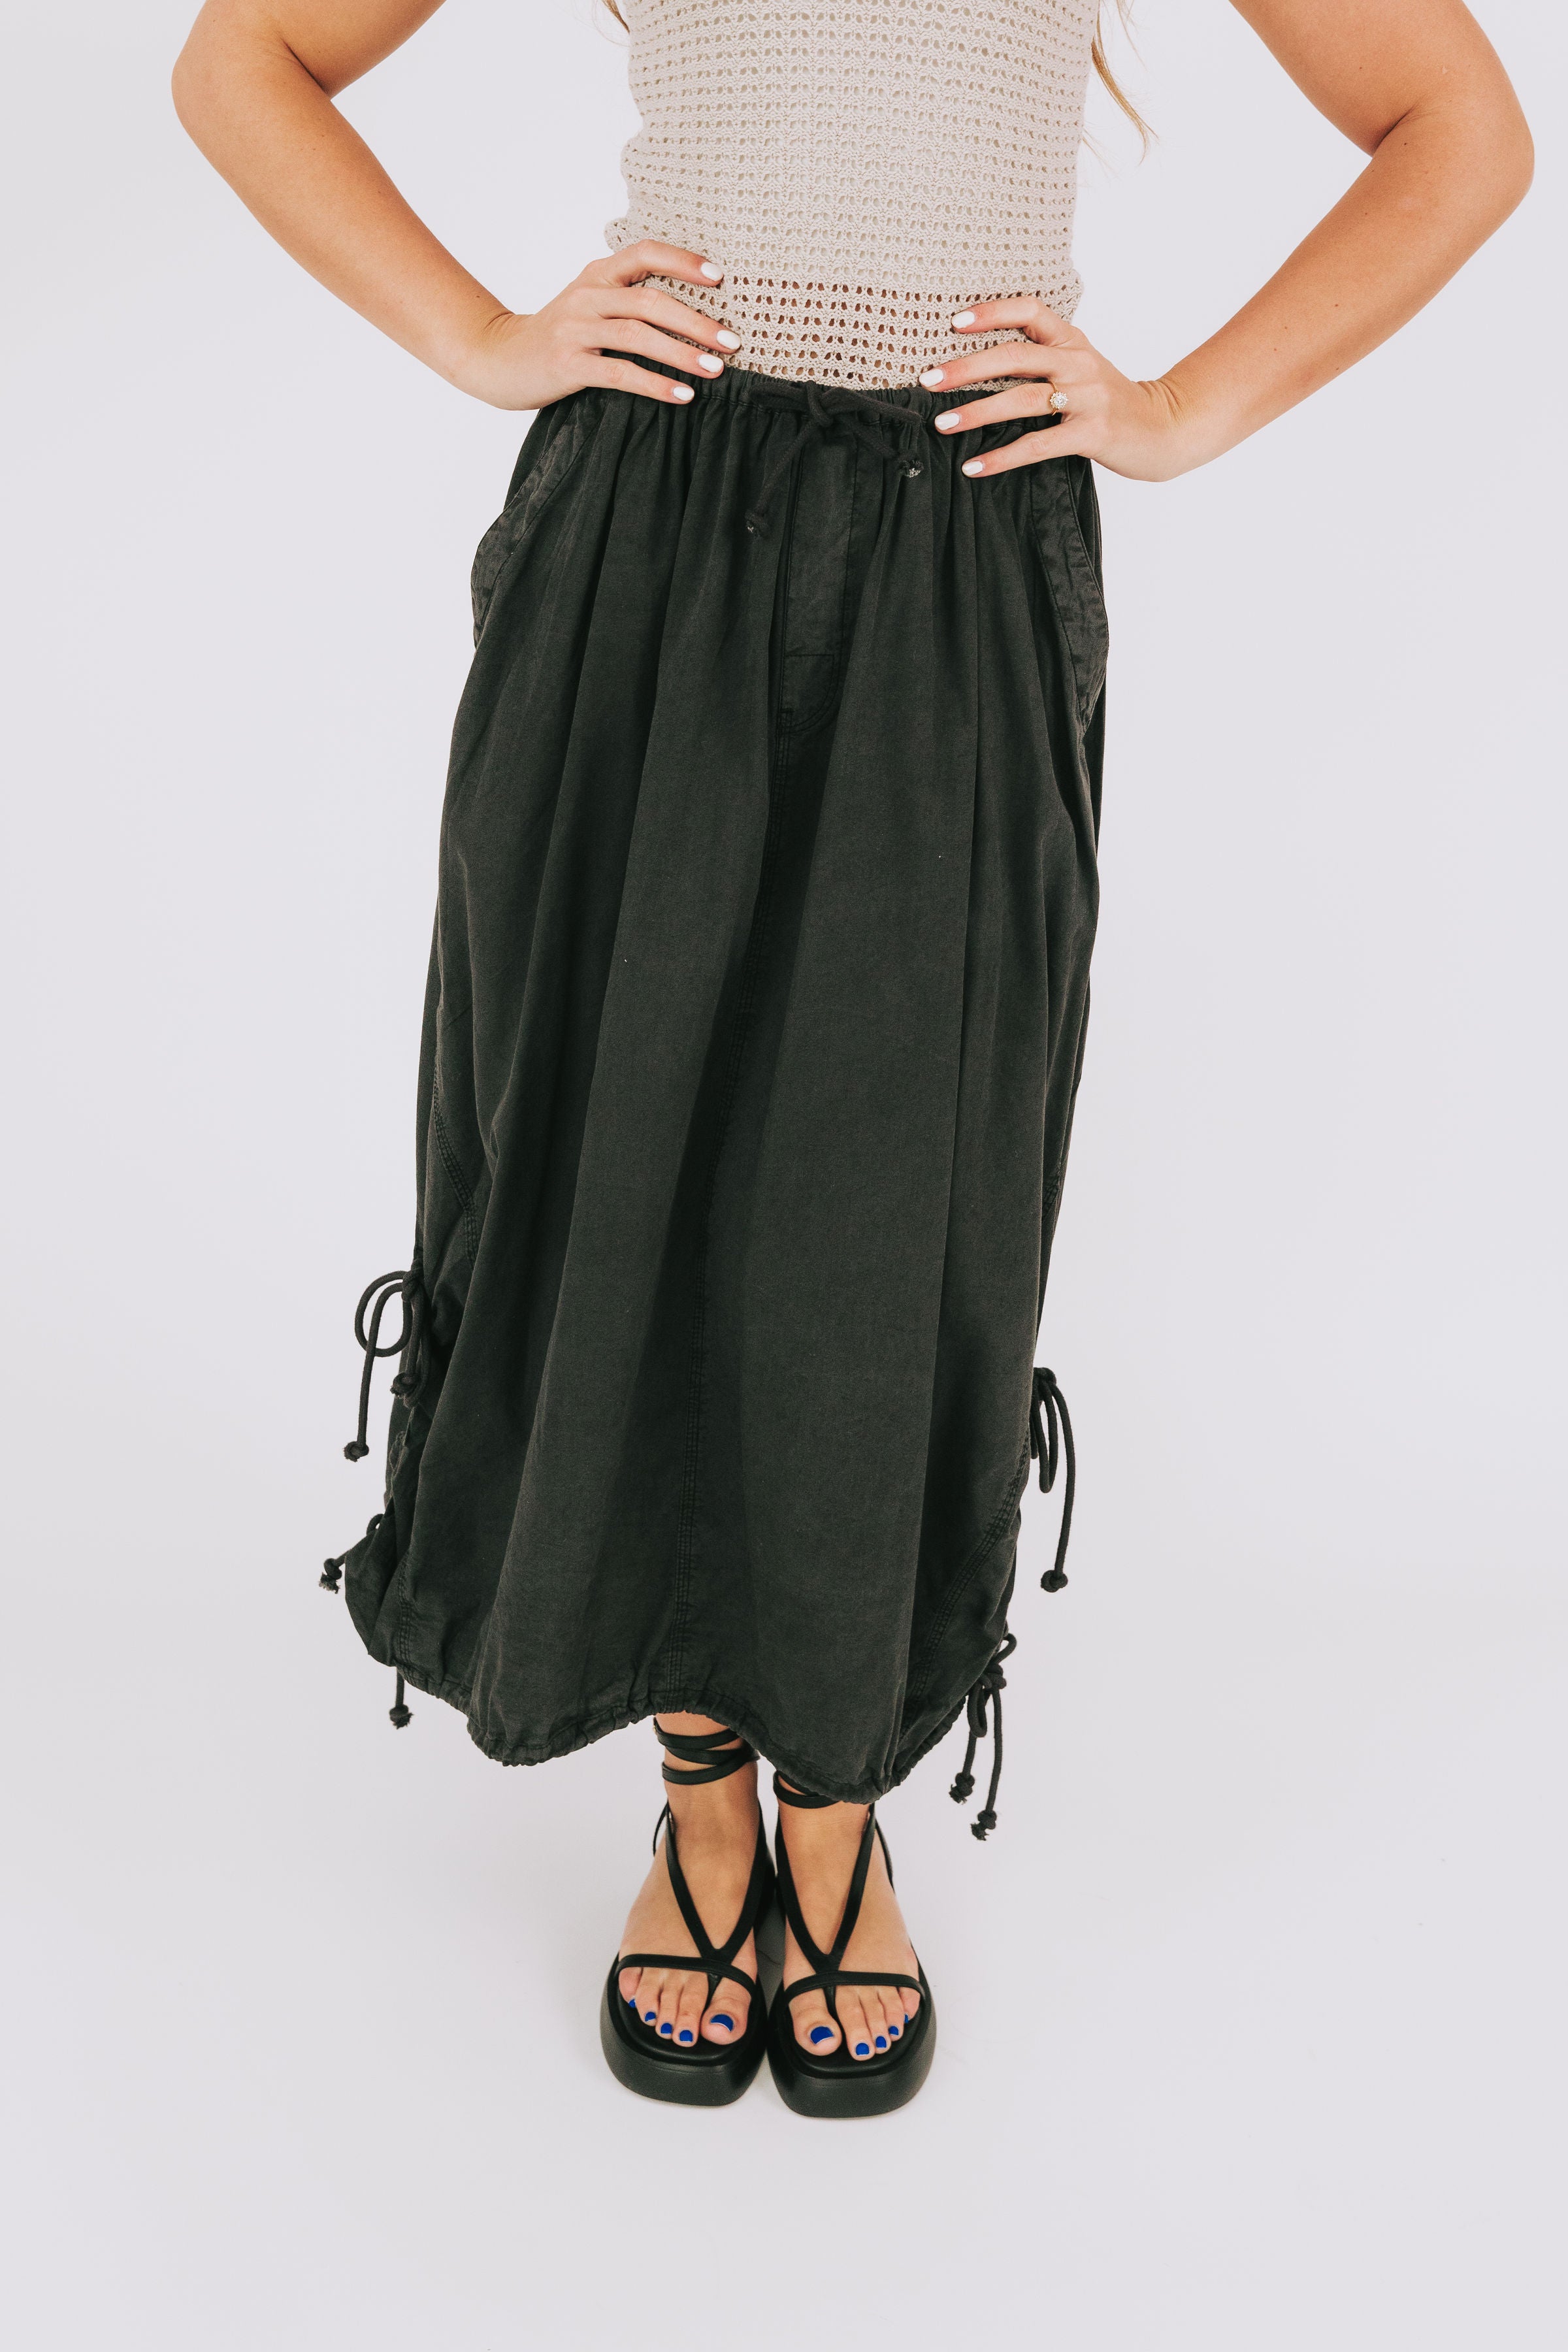 FREE PEOPLE - Picture Perfect Parachute Skirt